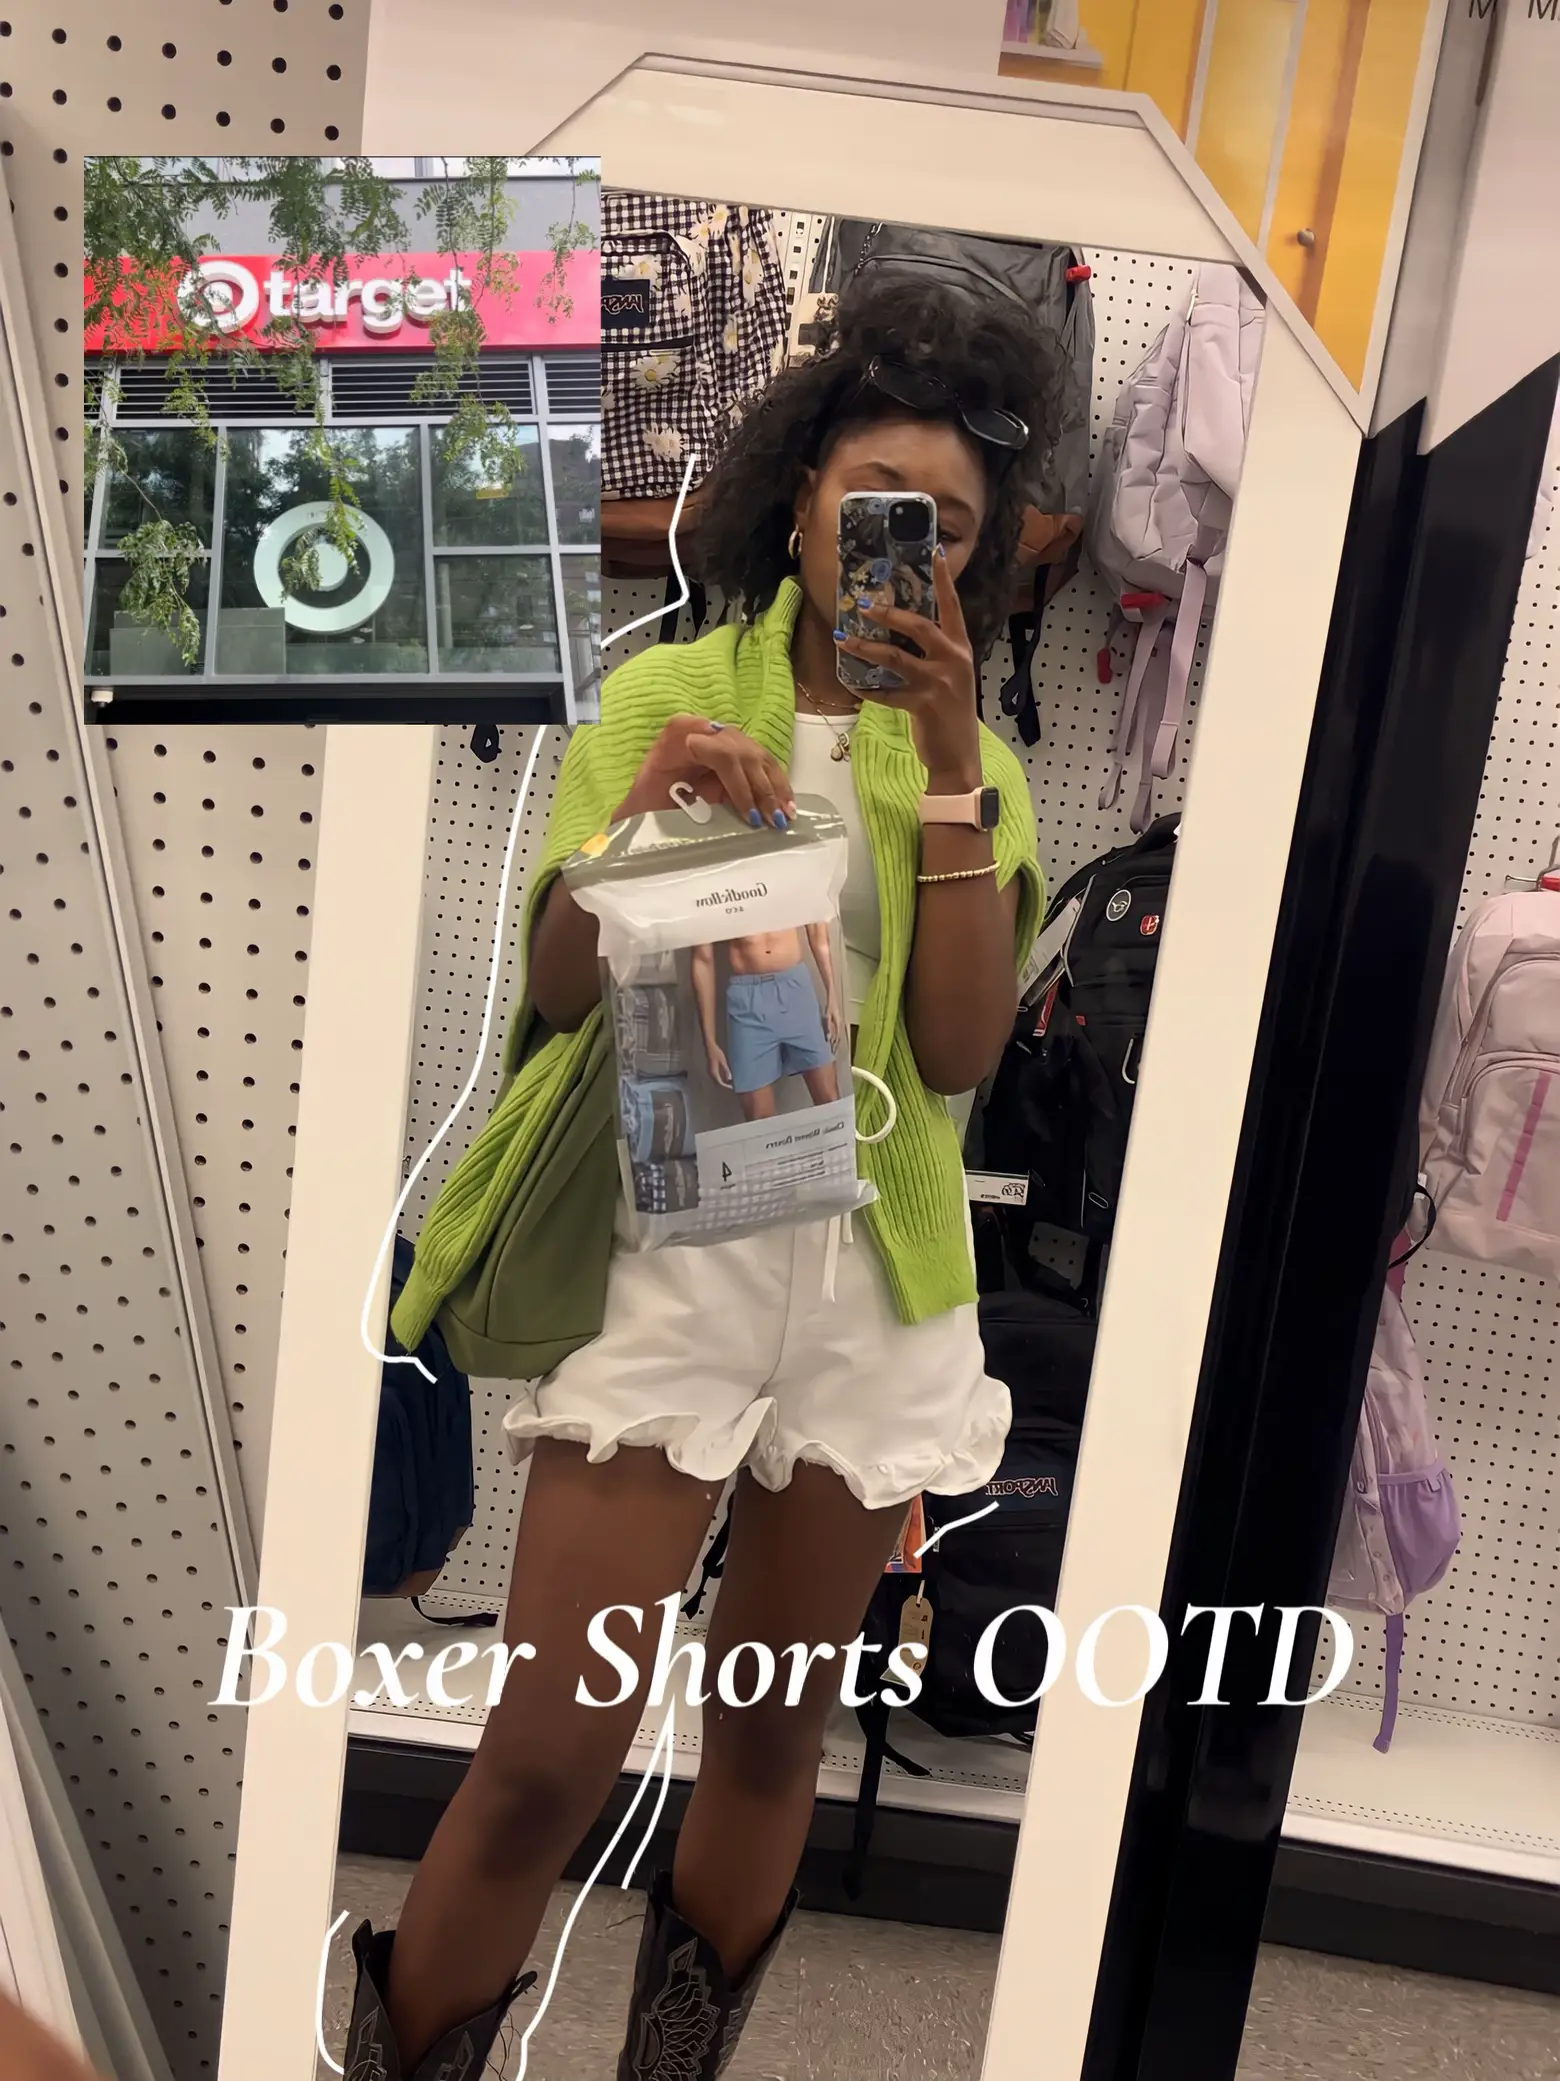 Target Boxers Shorts OOTD, Gallery posted by MadeSideGirl